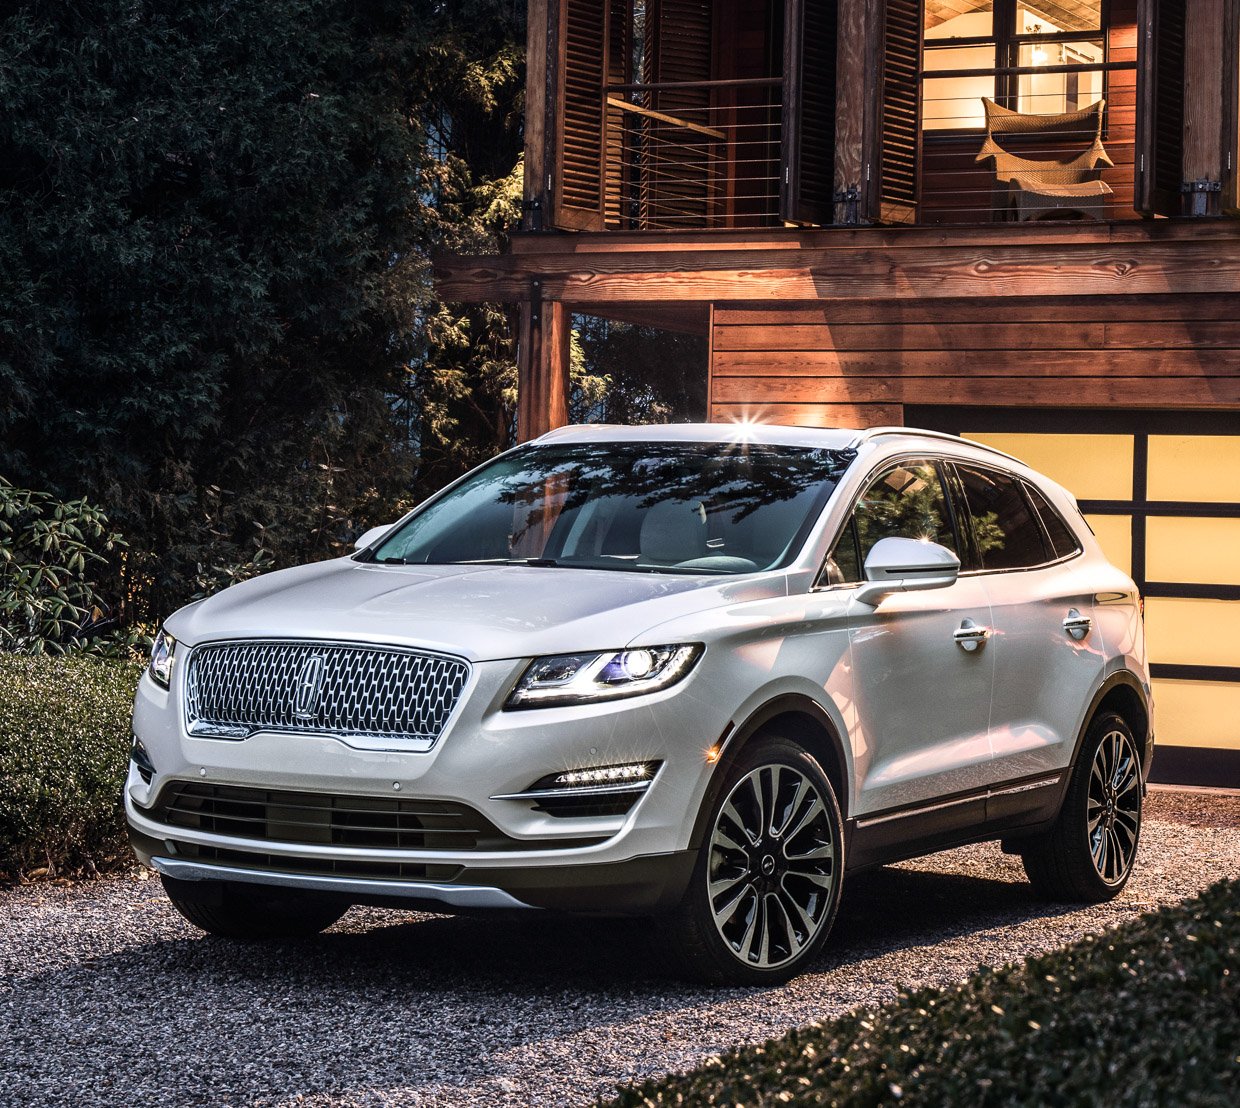 2019 Lincoln MKC Gets Refined New Looks